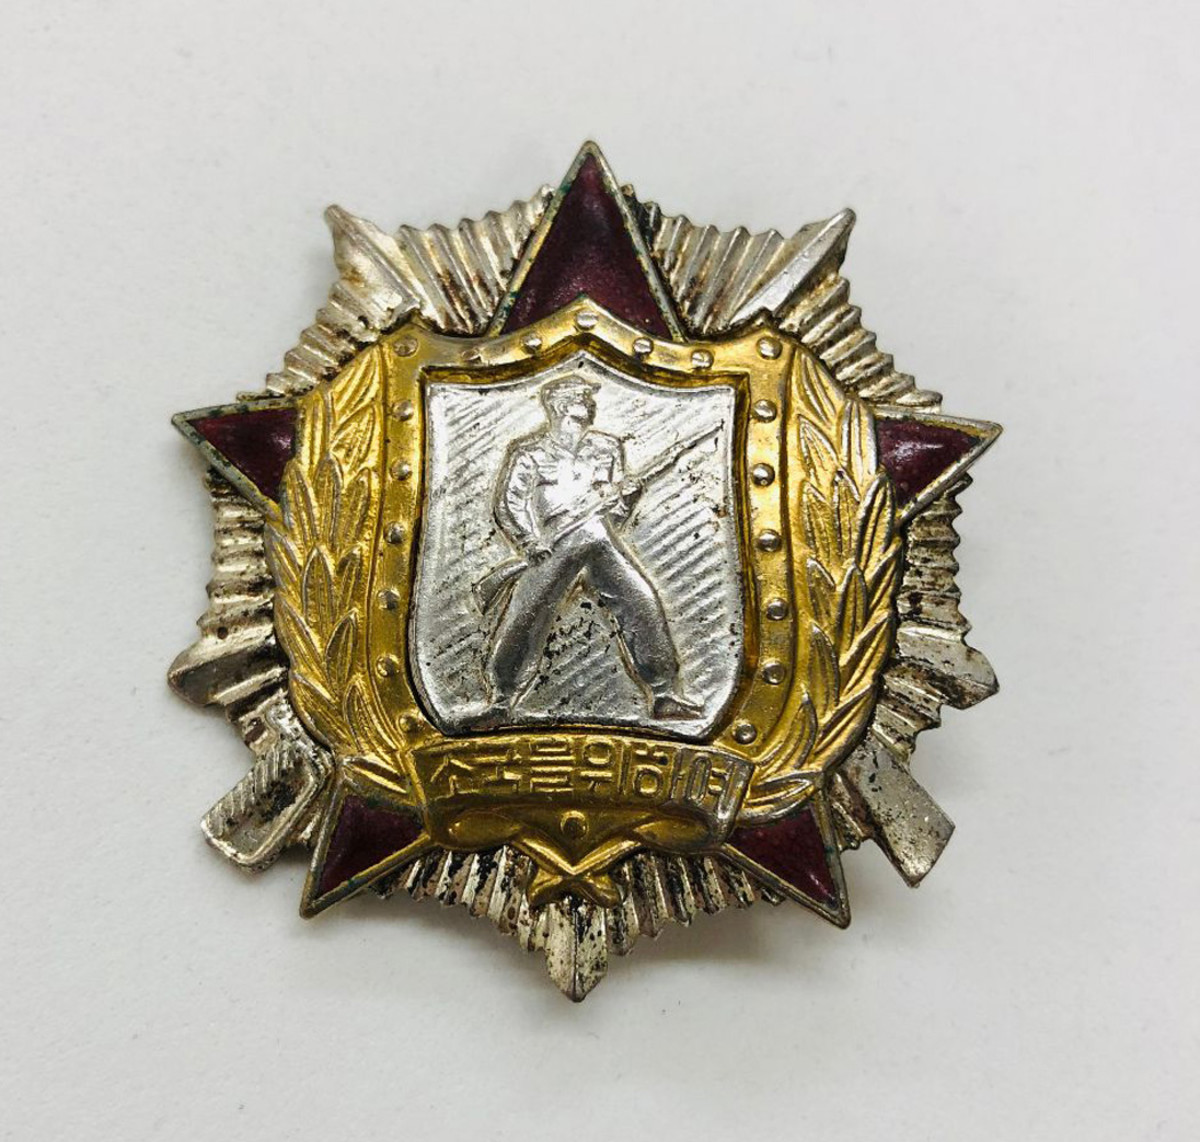 The Order of Soldier’s Honor is a five-pointed red enamel star superimpose over a larger multi-rayed 10-point star.